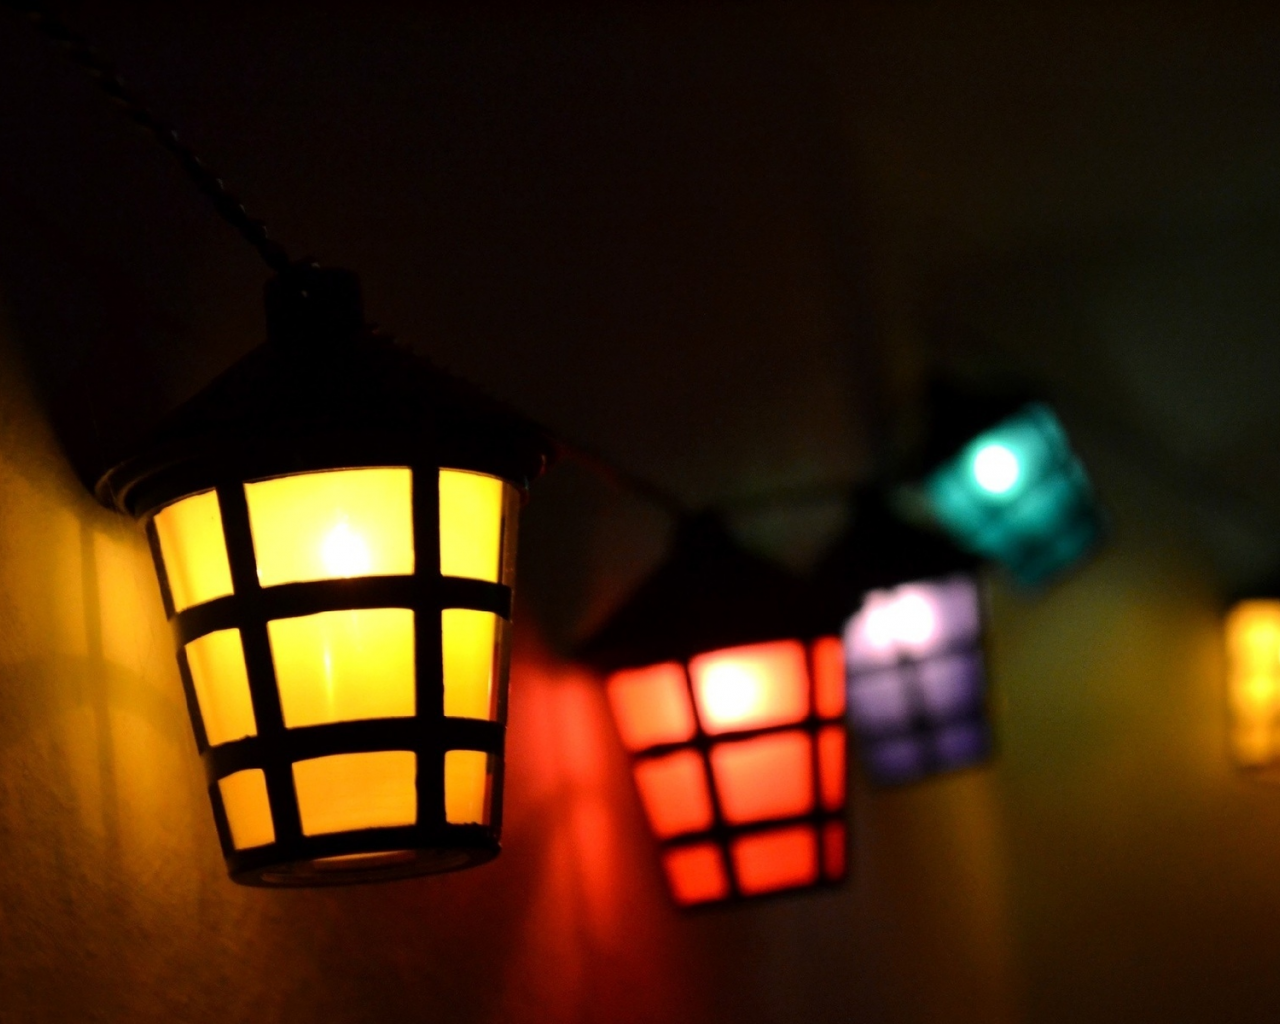 lights, colors, red, blue, purple, yellow, lamp